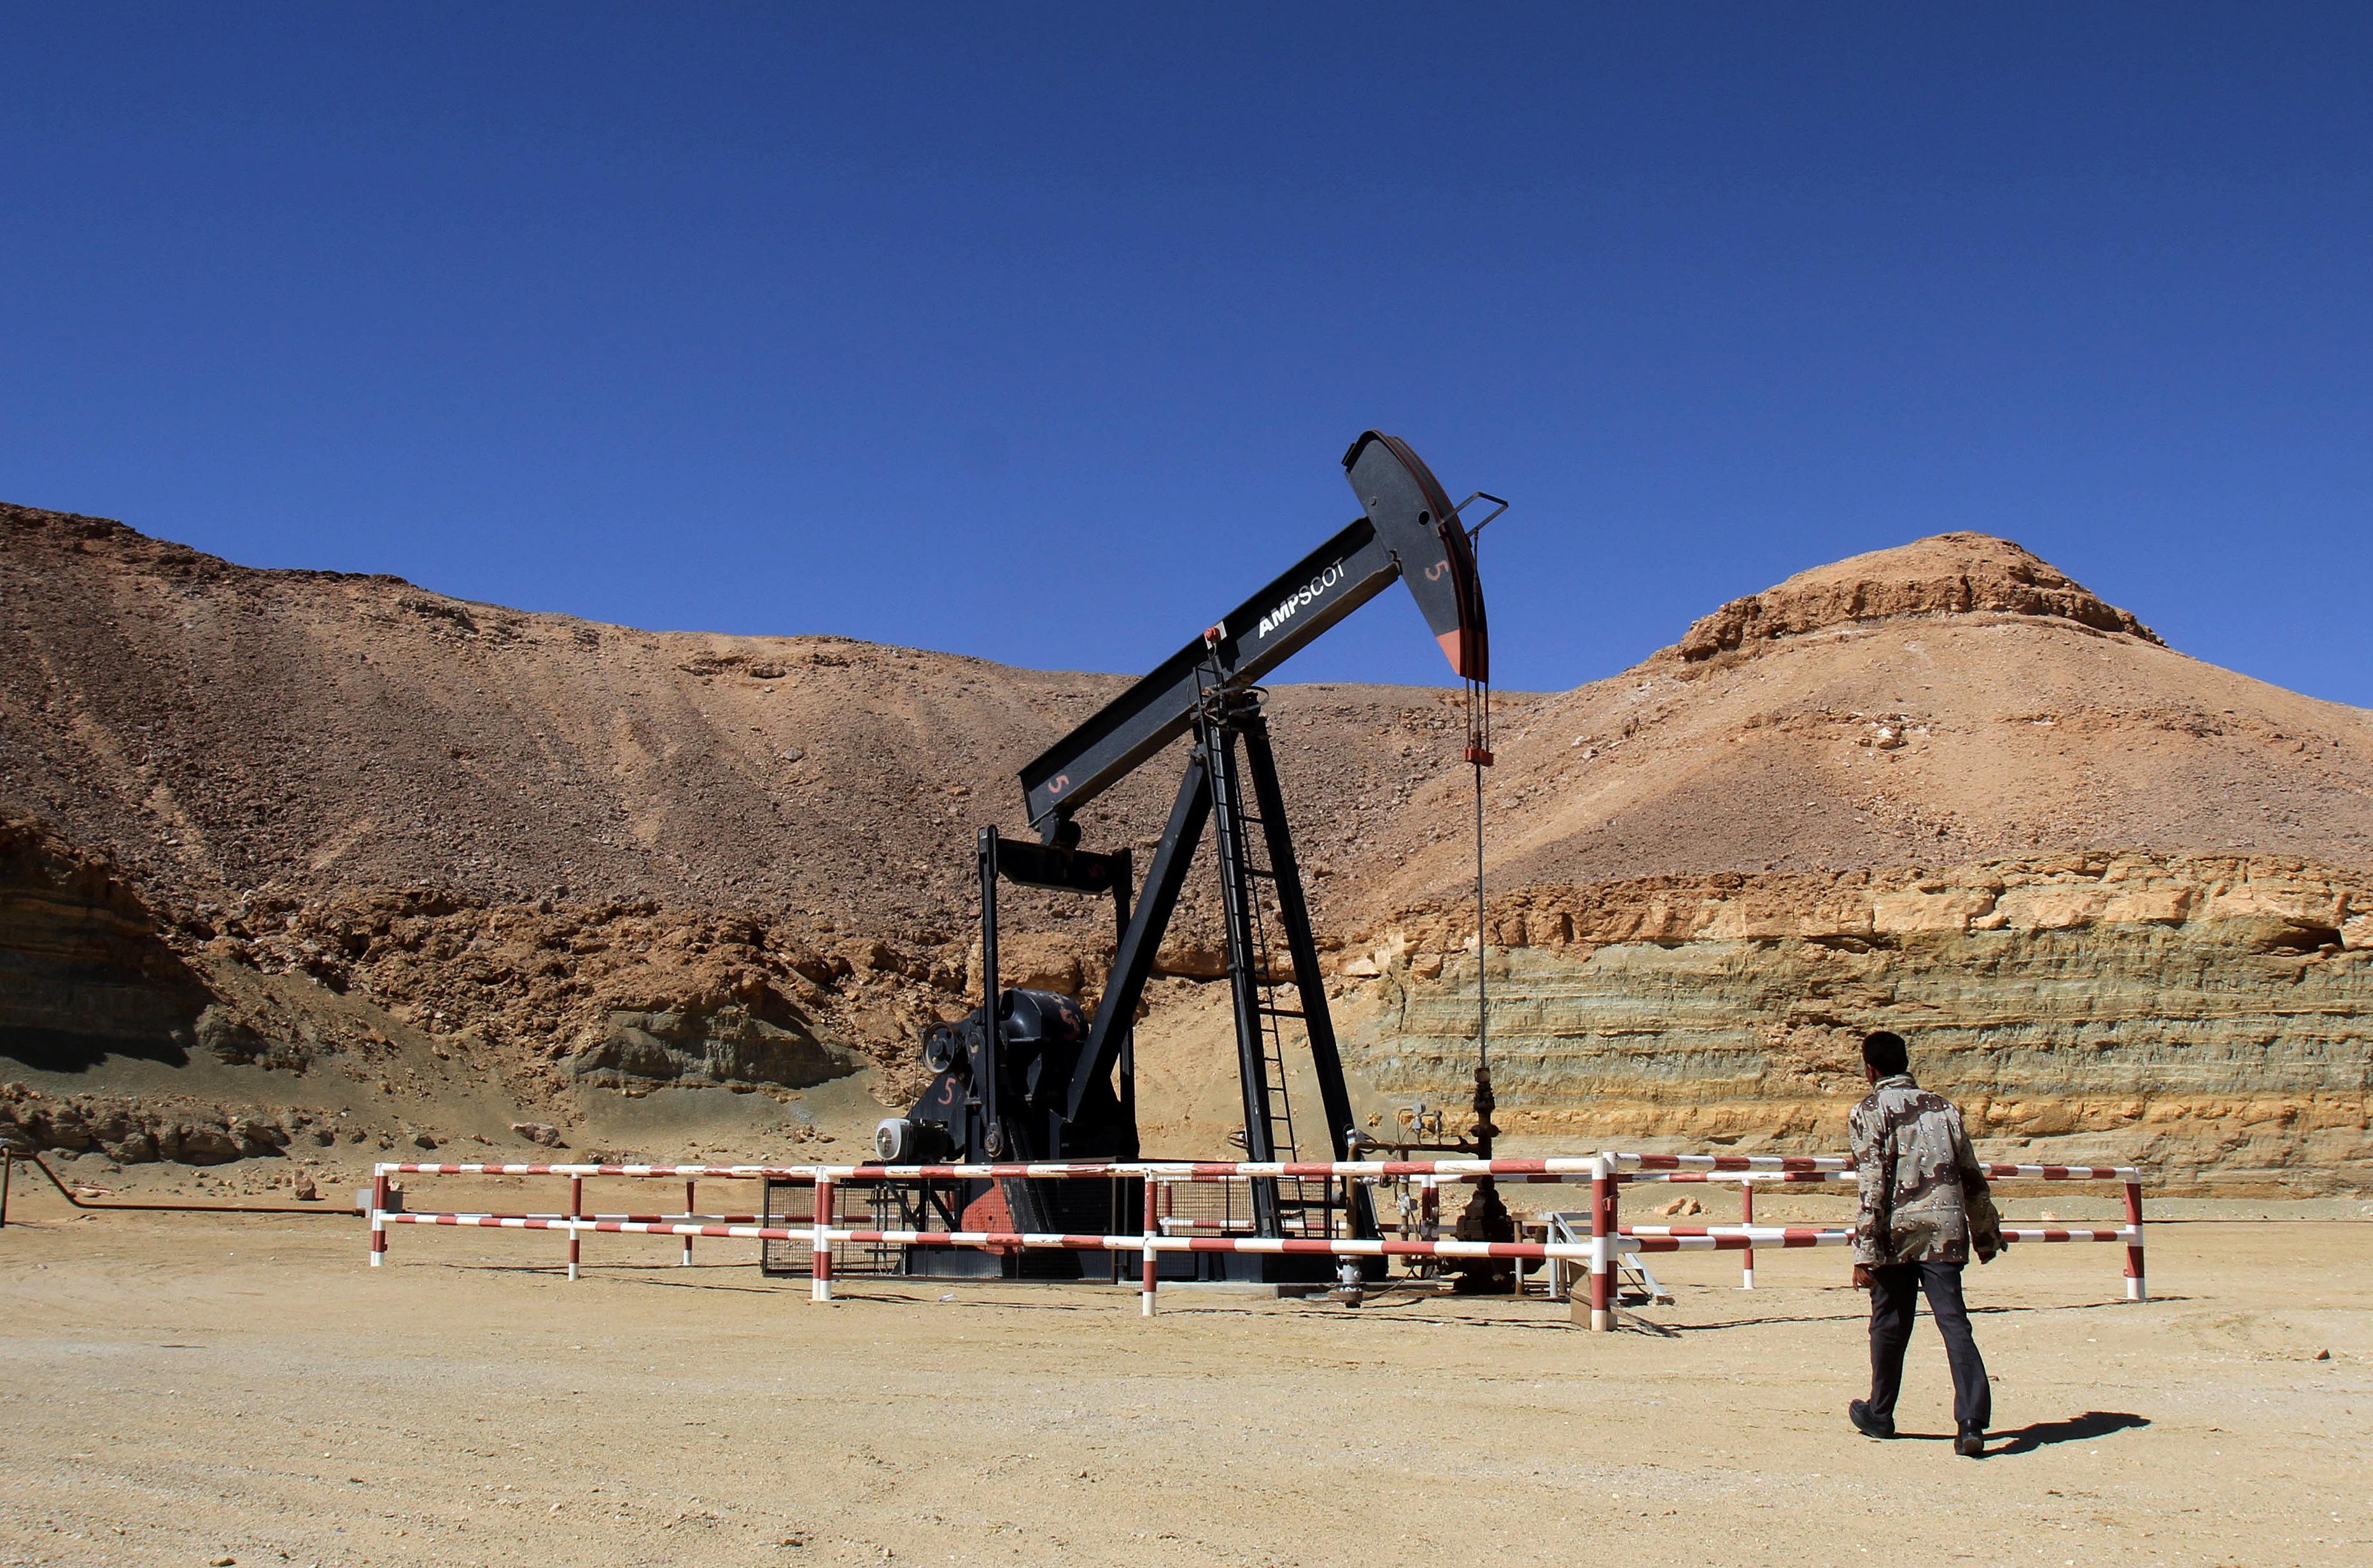 excursion to get oil over in libya